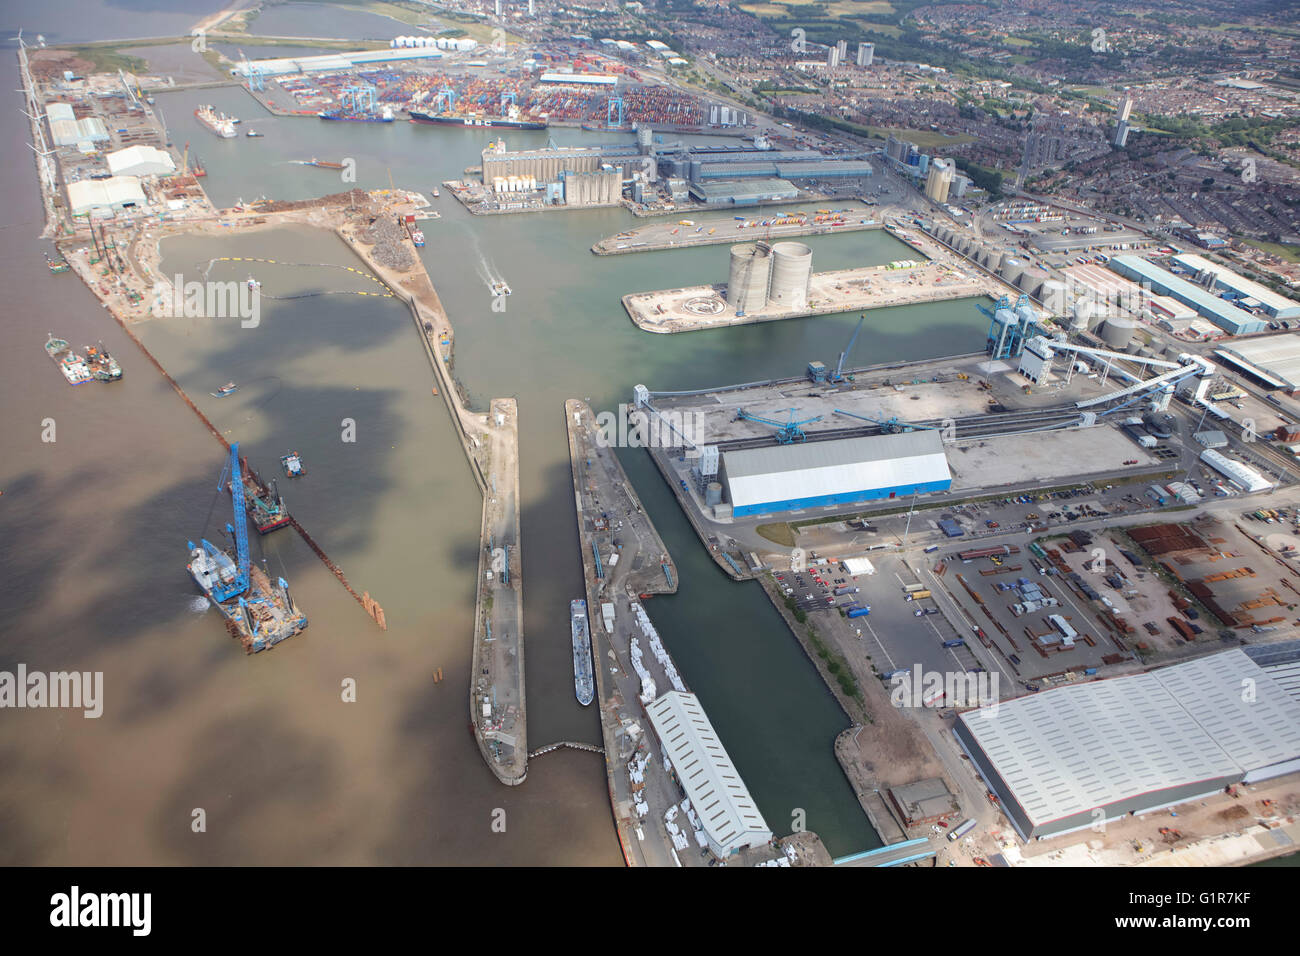 An aerial view of the Seaforth Docks, Port of Liverpool Stock Photo